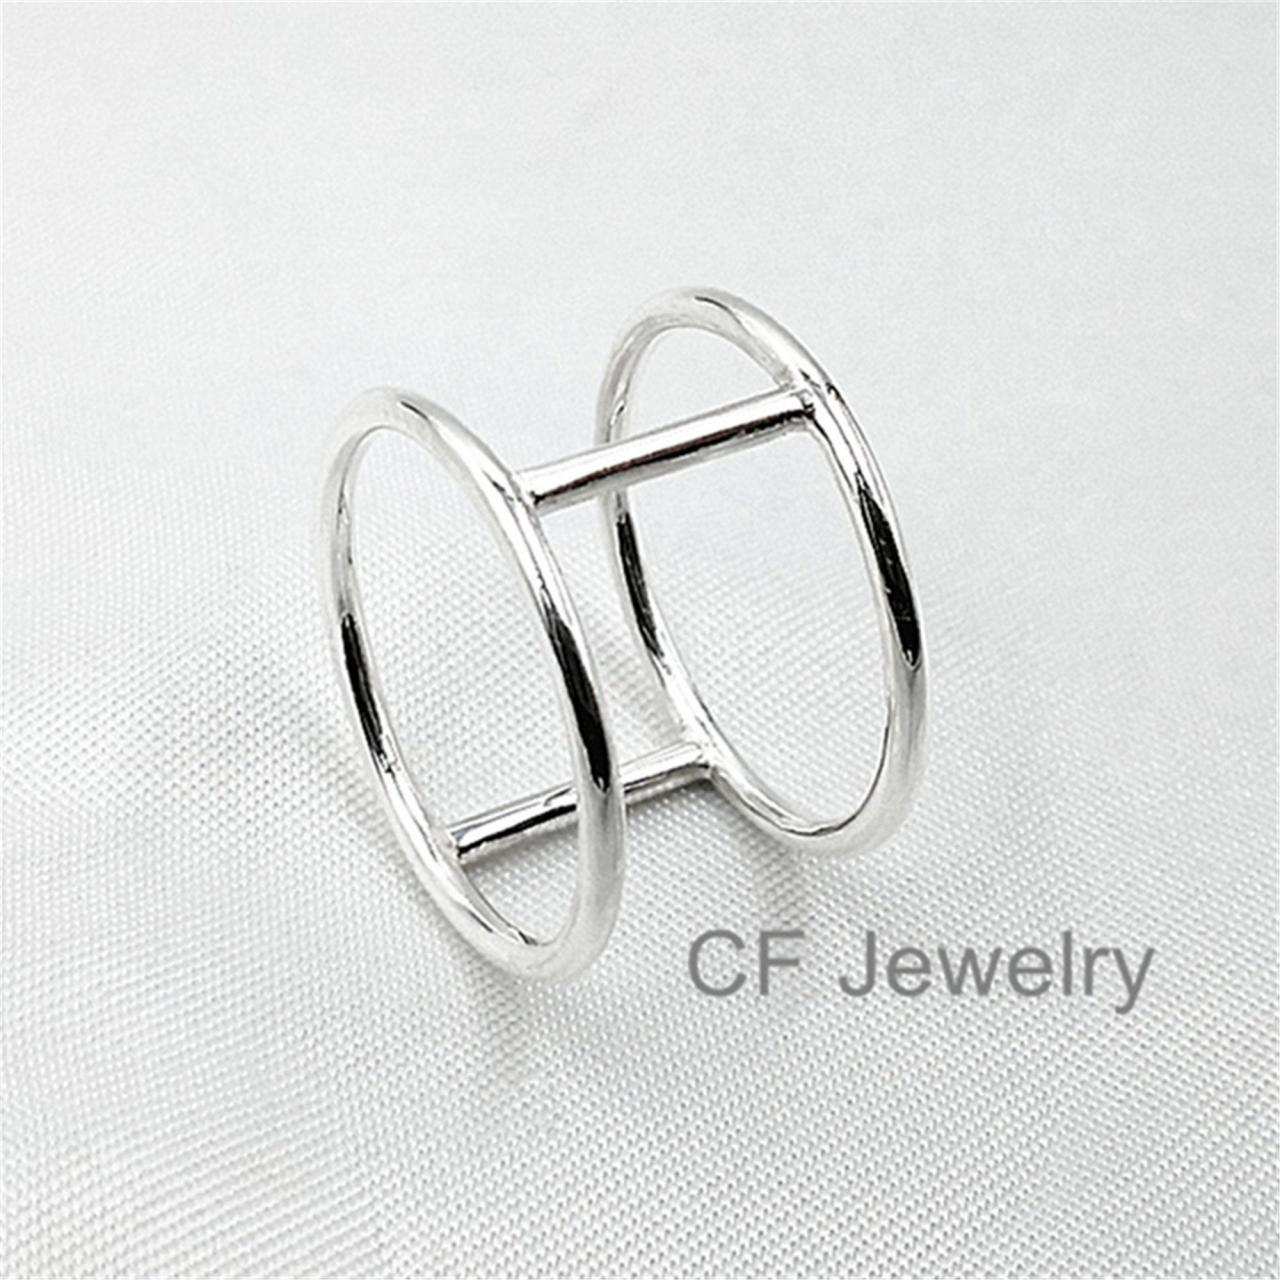 1.3mm Silver Cage Ring Gold Double Bar Ring Silver Statement Ring Rose Gold Cage Ring Sterling Silver Cage Ring Jewelry Gold Statement Ring.